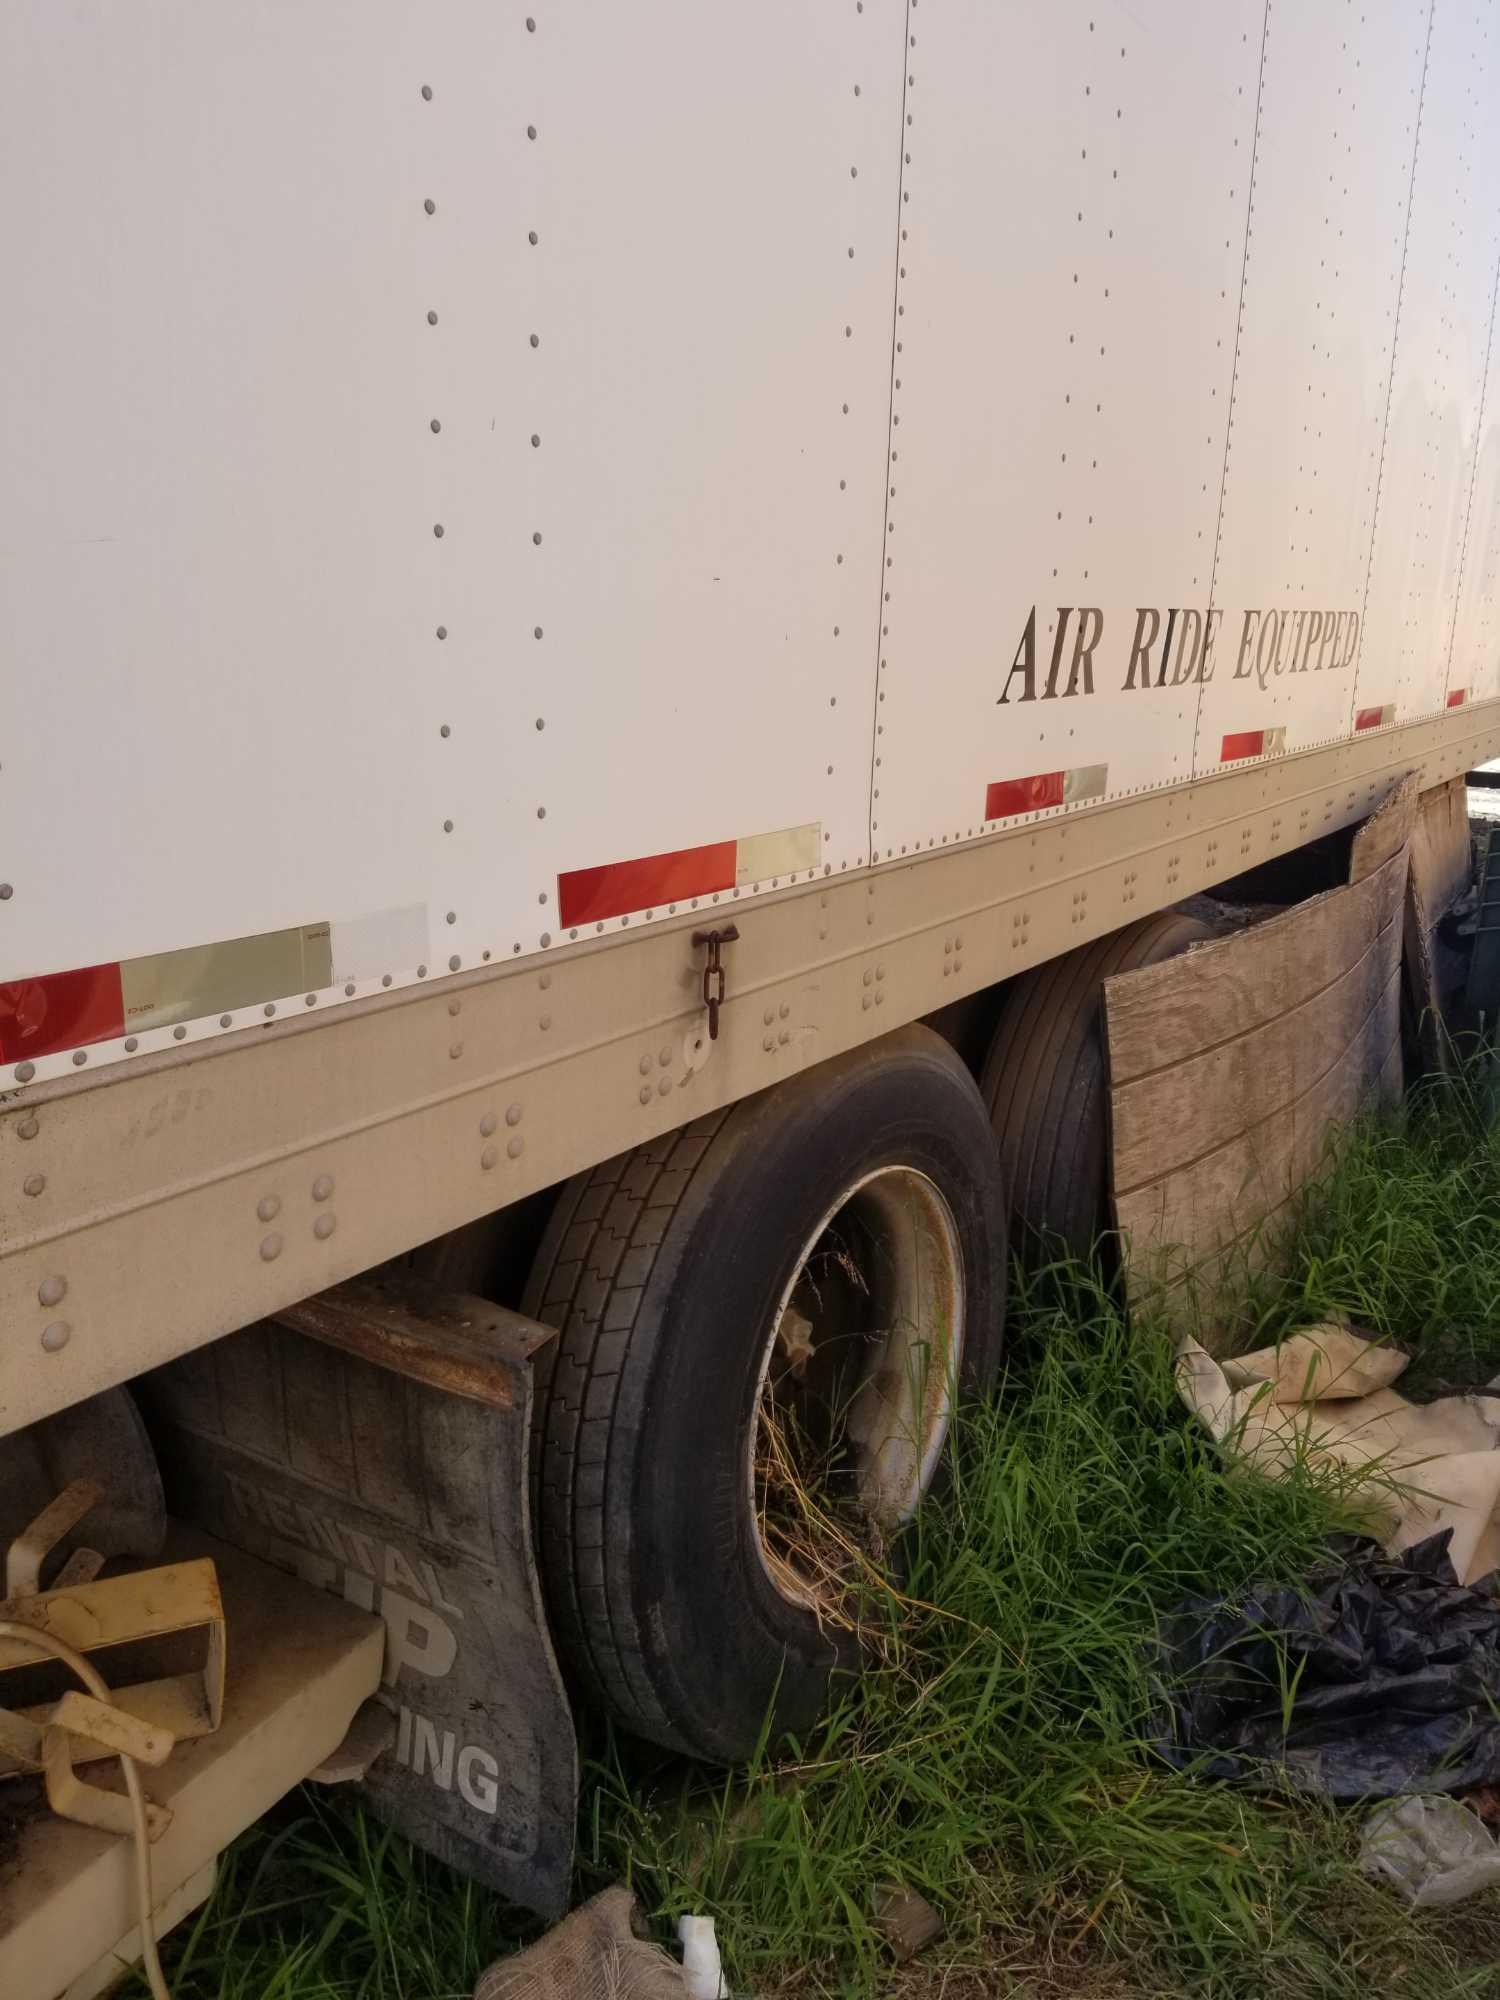 45 Foot Tractor Trailer with Contents Tag 4HK4191